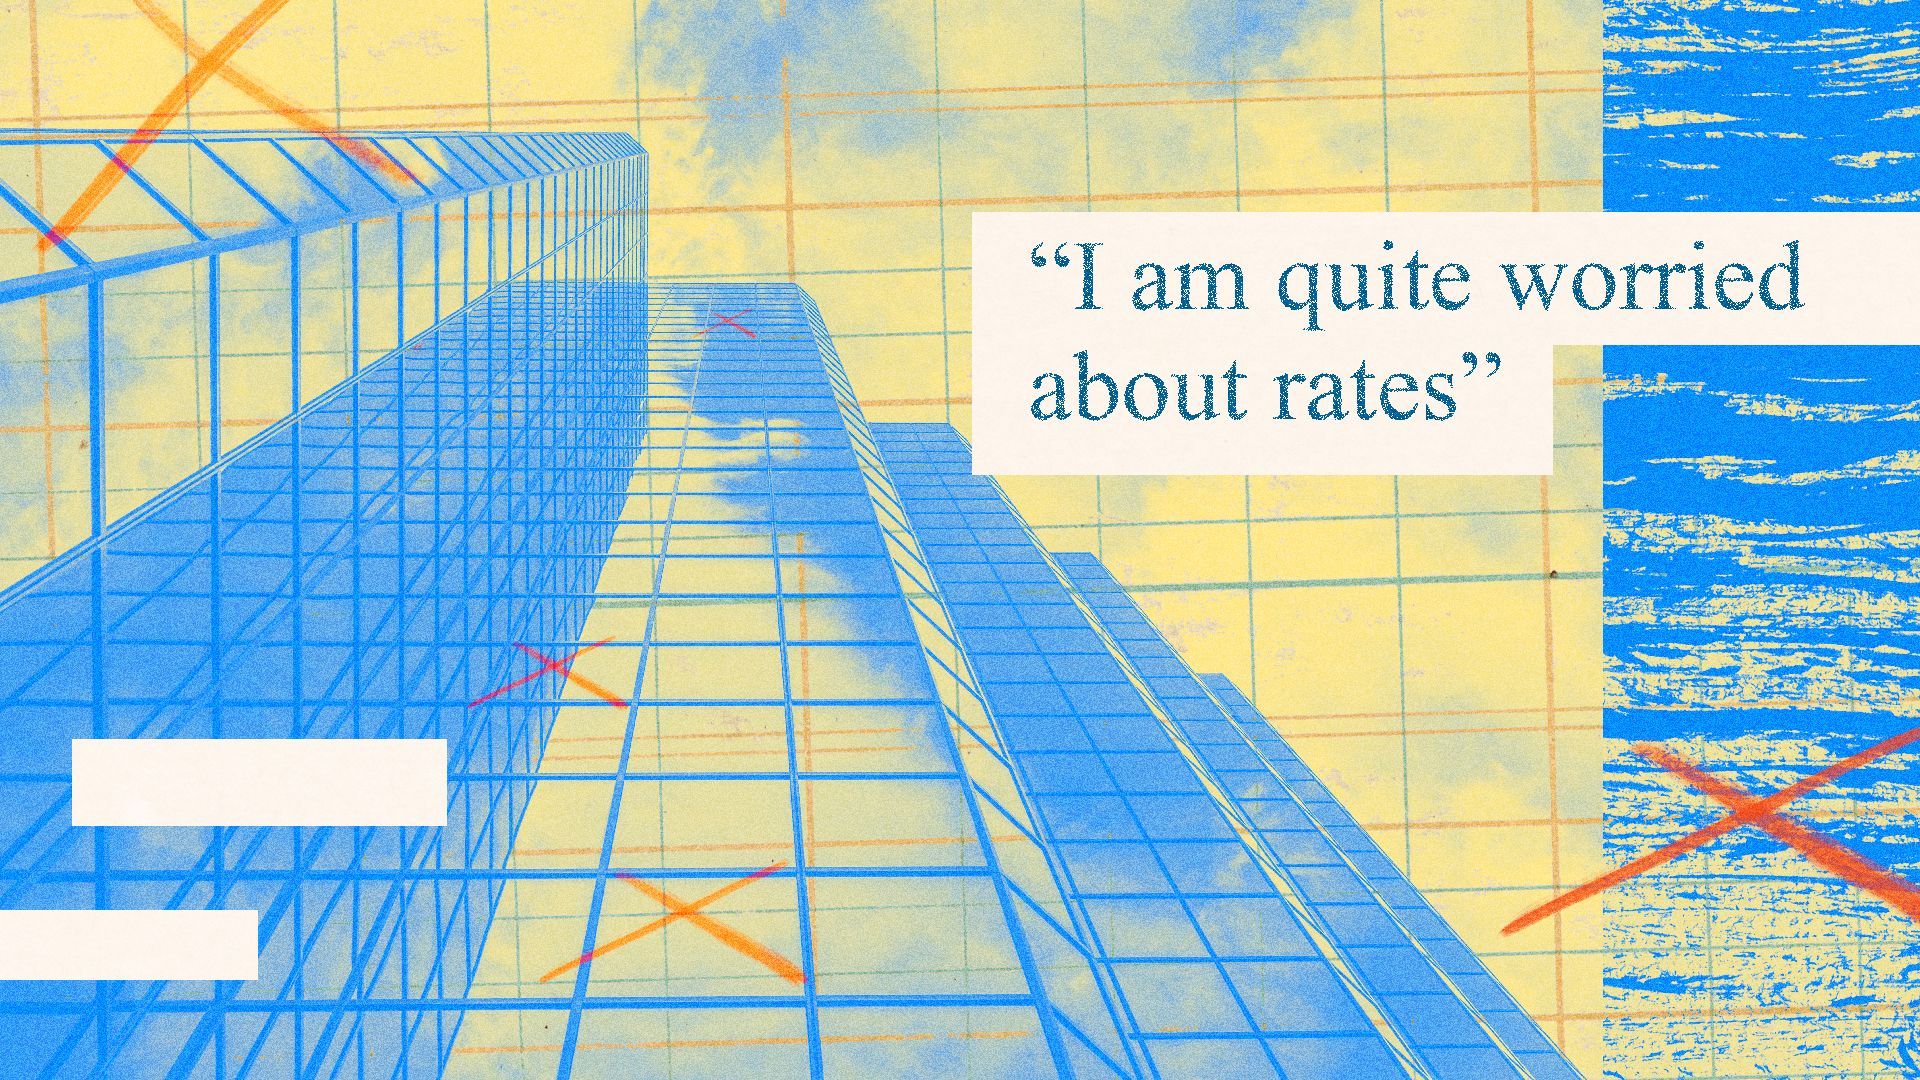 Illustration of an abstract collage of X's, grid lines, glass office building, and text that reads "I am quite worried about rates".